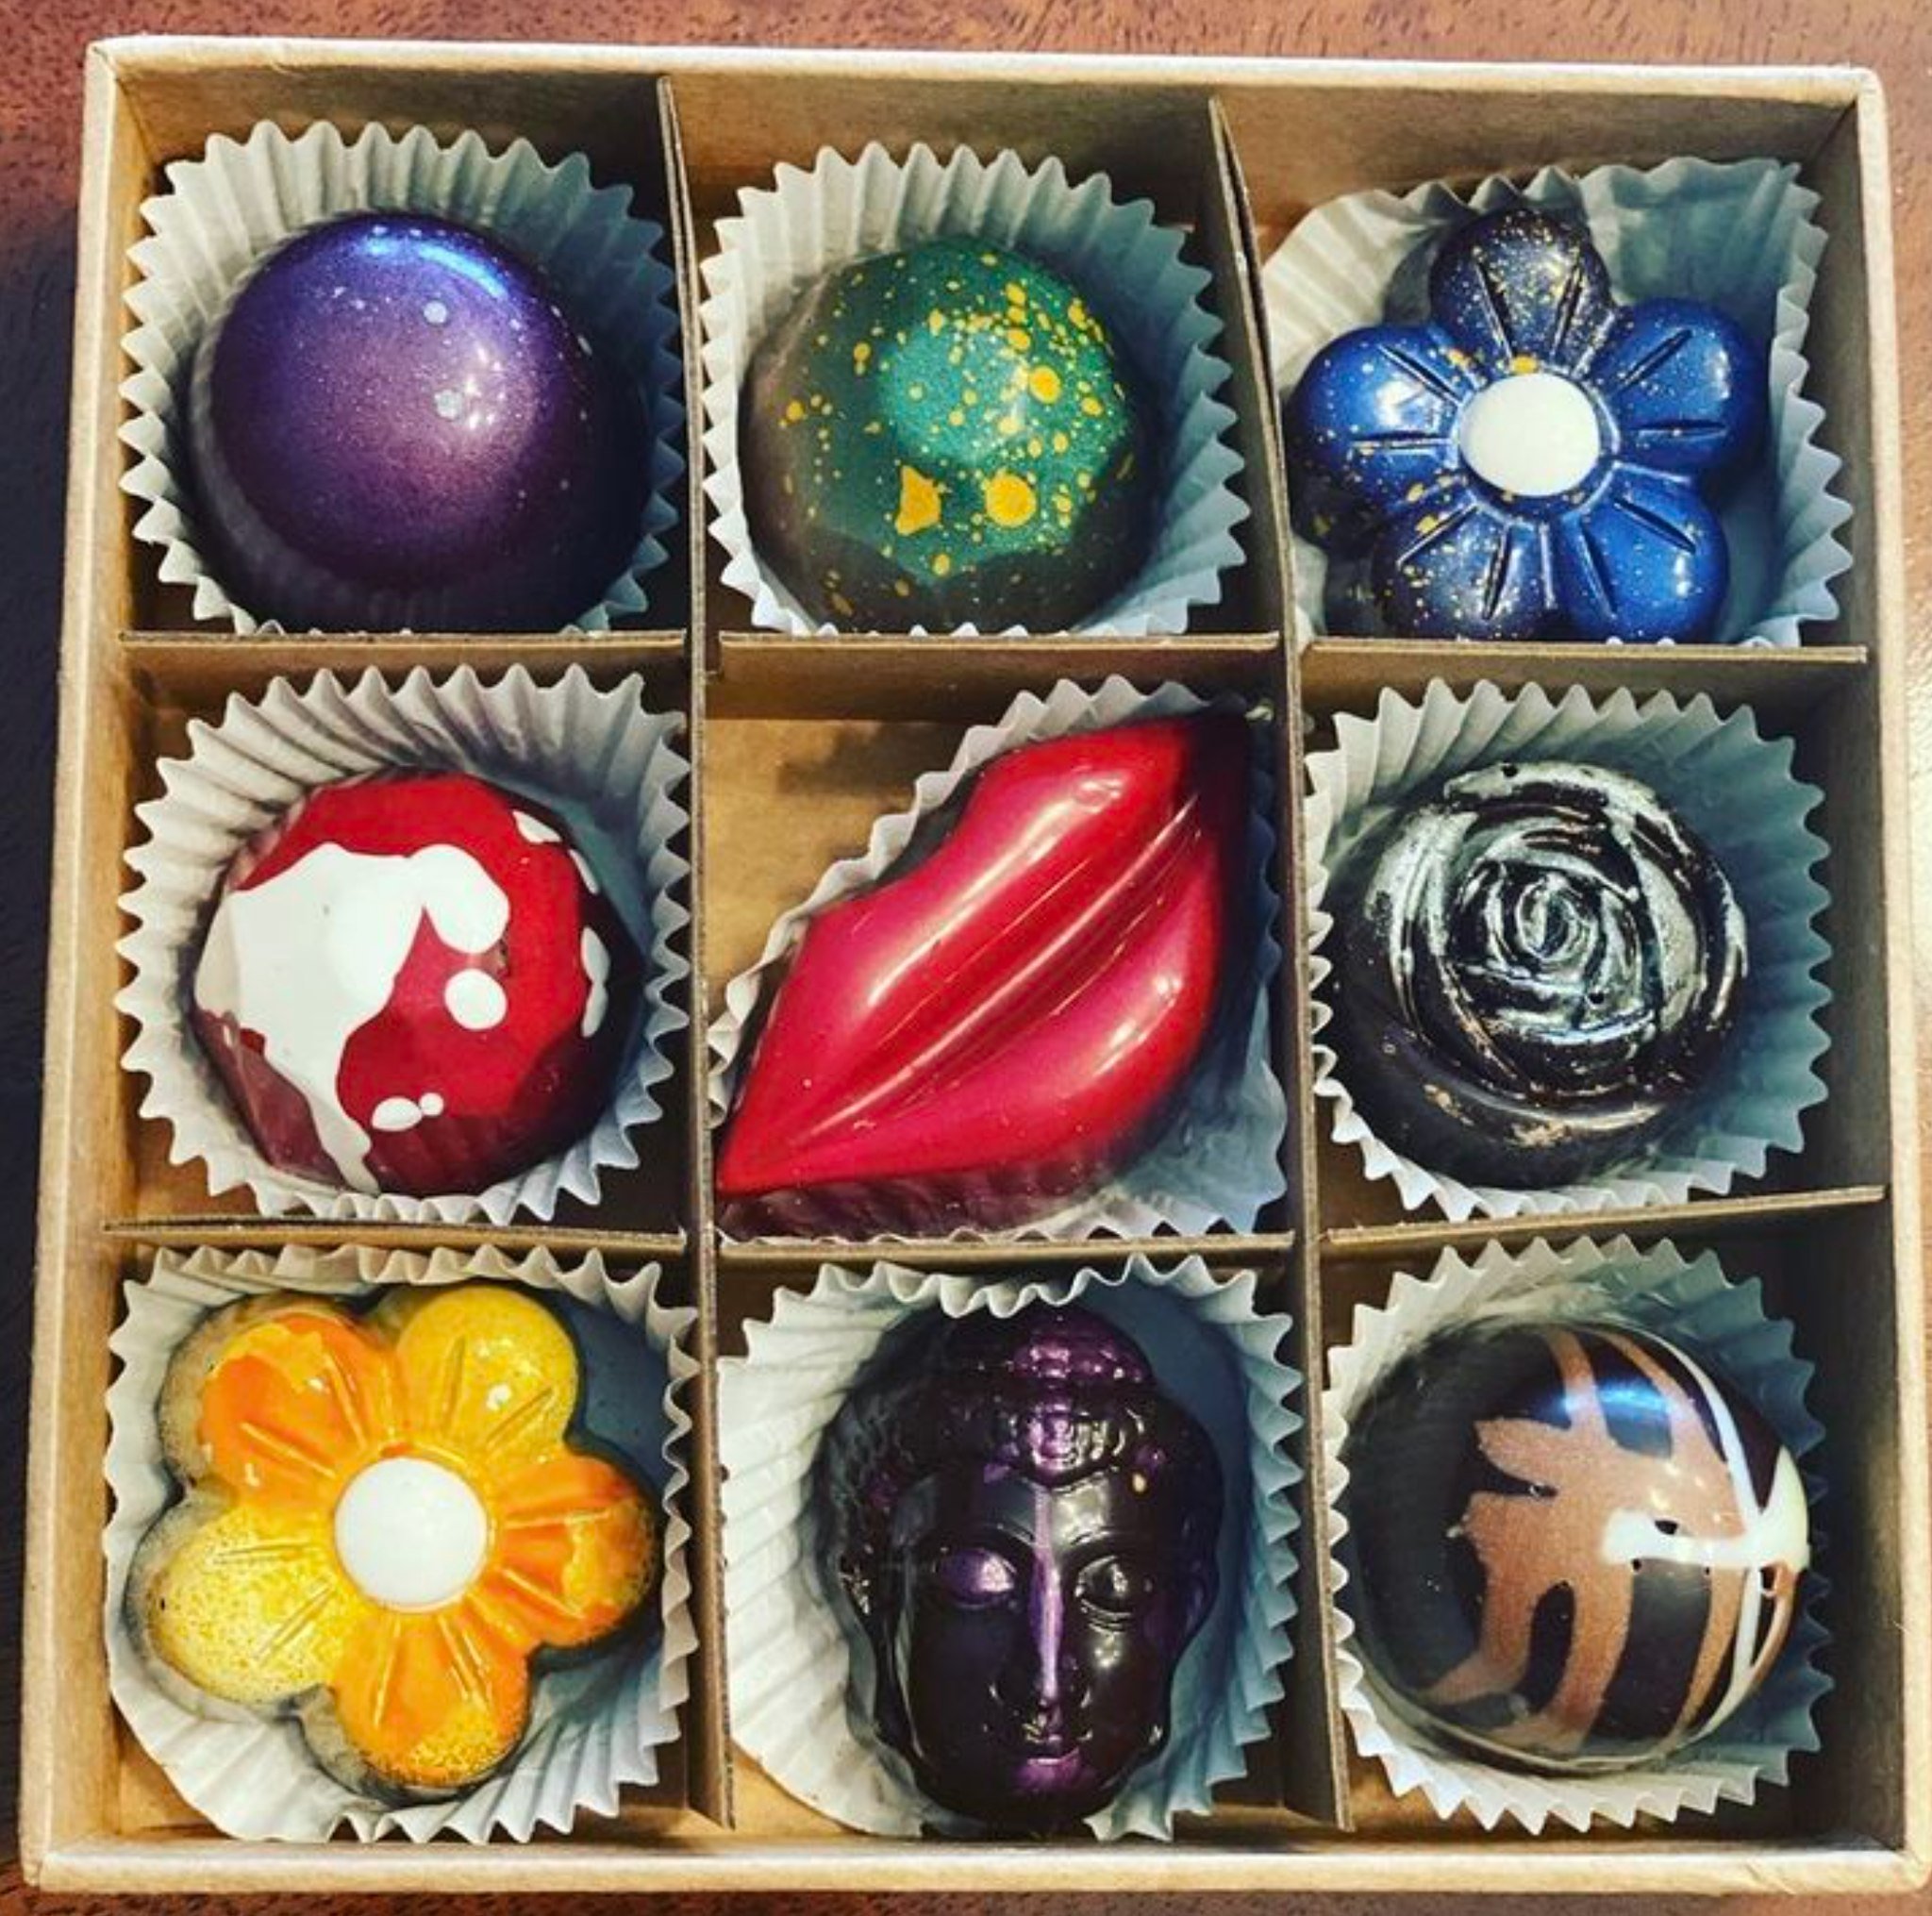 Fully customizable - pick your size box, pick your chocolates!
(Vegan options available)

#COCO #COCOseacliff #candybars #truffles #cholatier #confections #giftcard #longislandcoffeeshop #longislandchocolateshop #delicioustruffles #coffeeshop #seacli